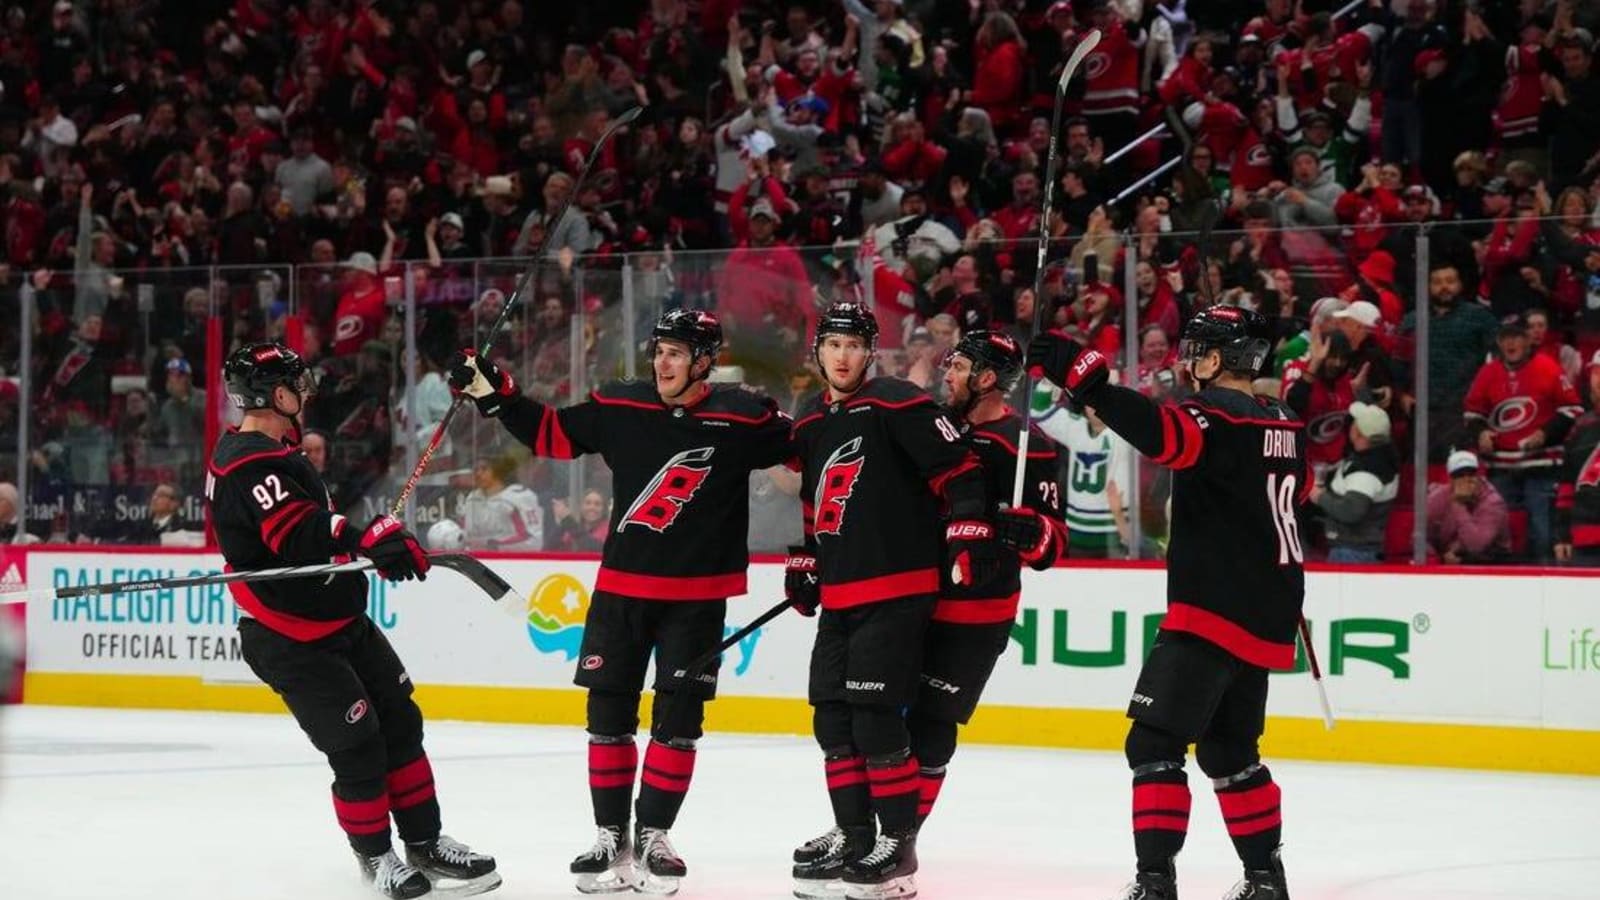 In home finale, Hurricanes aim to brush off Blue Jackets